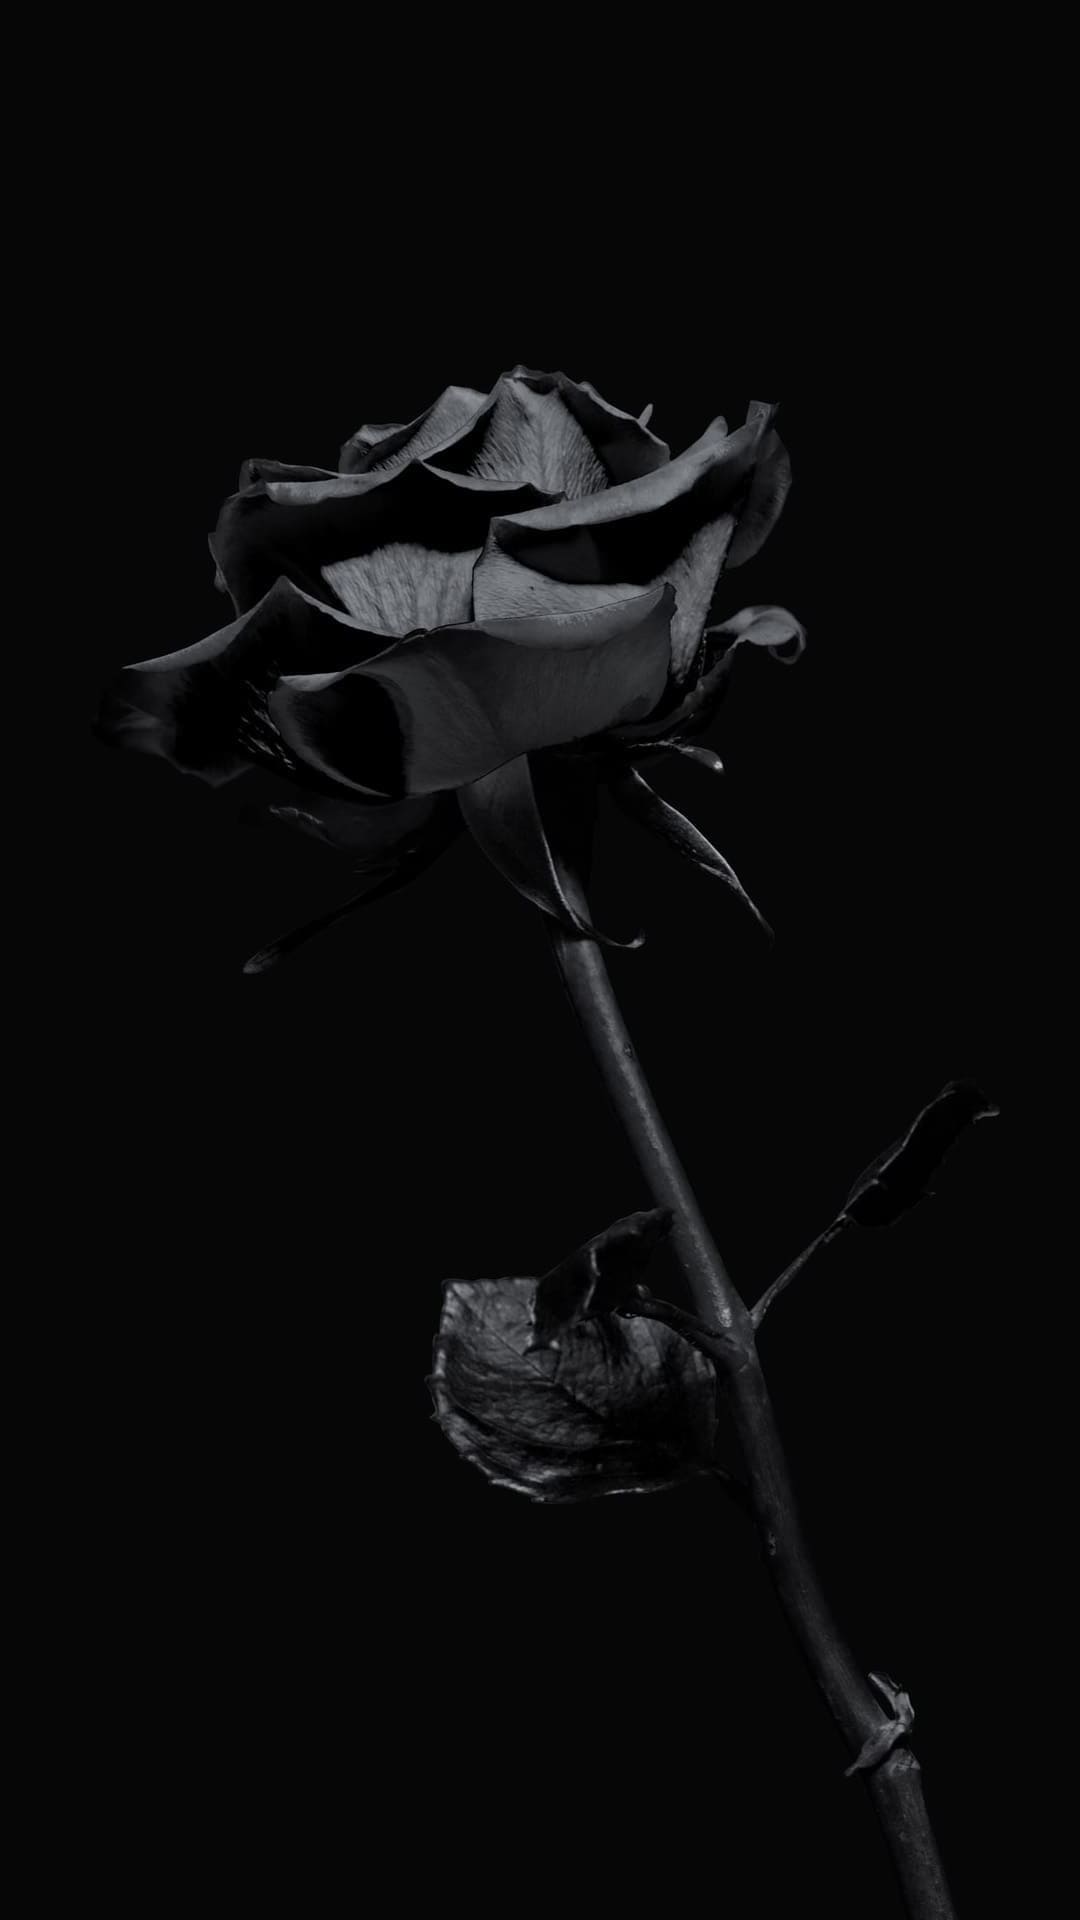 A black and white photo of the rose - Black rose